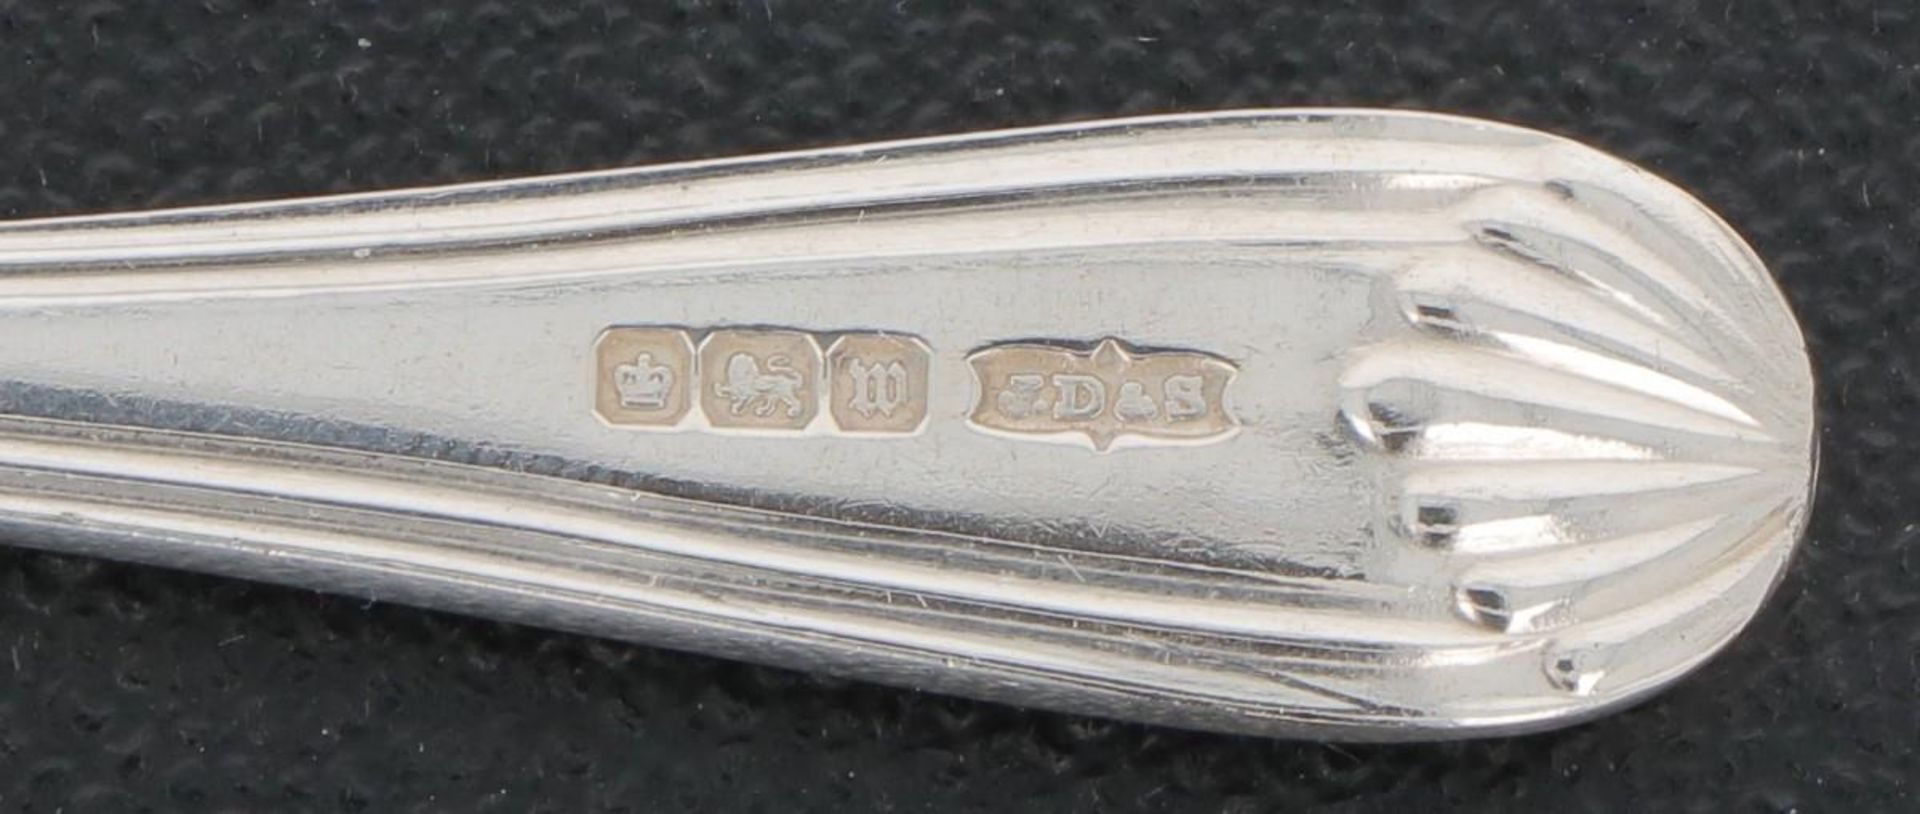 (12) piece set strawberry forks silver. - Image 4 of 4